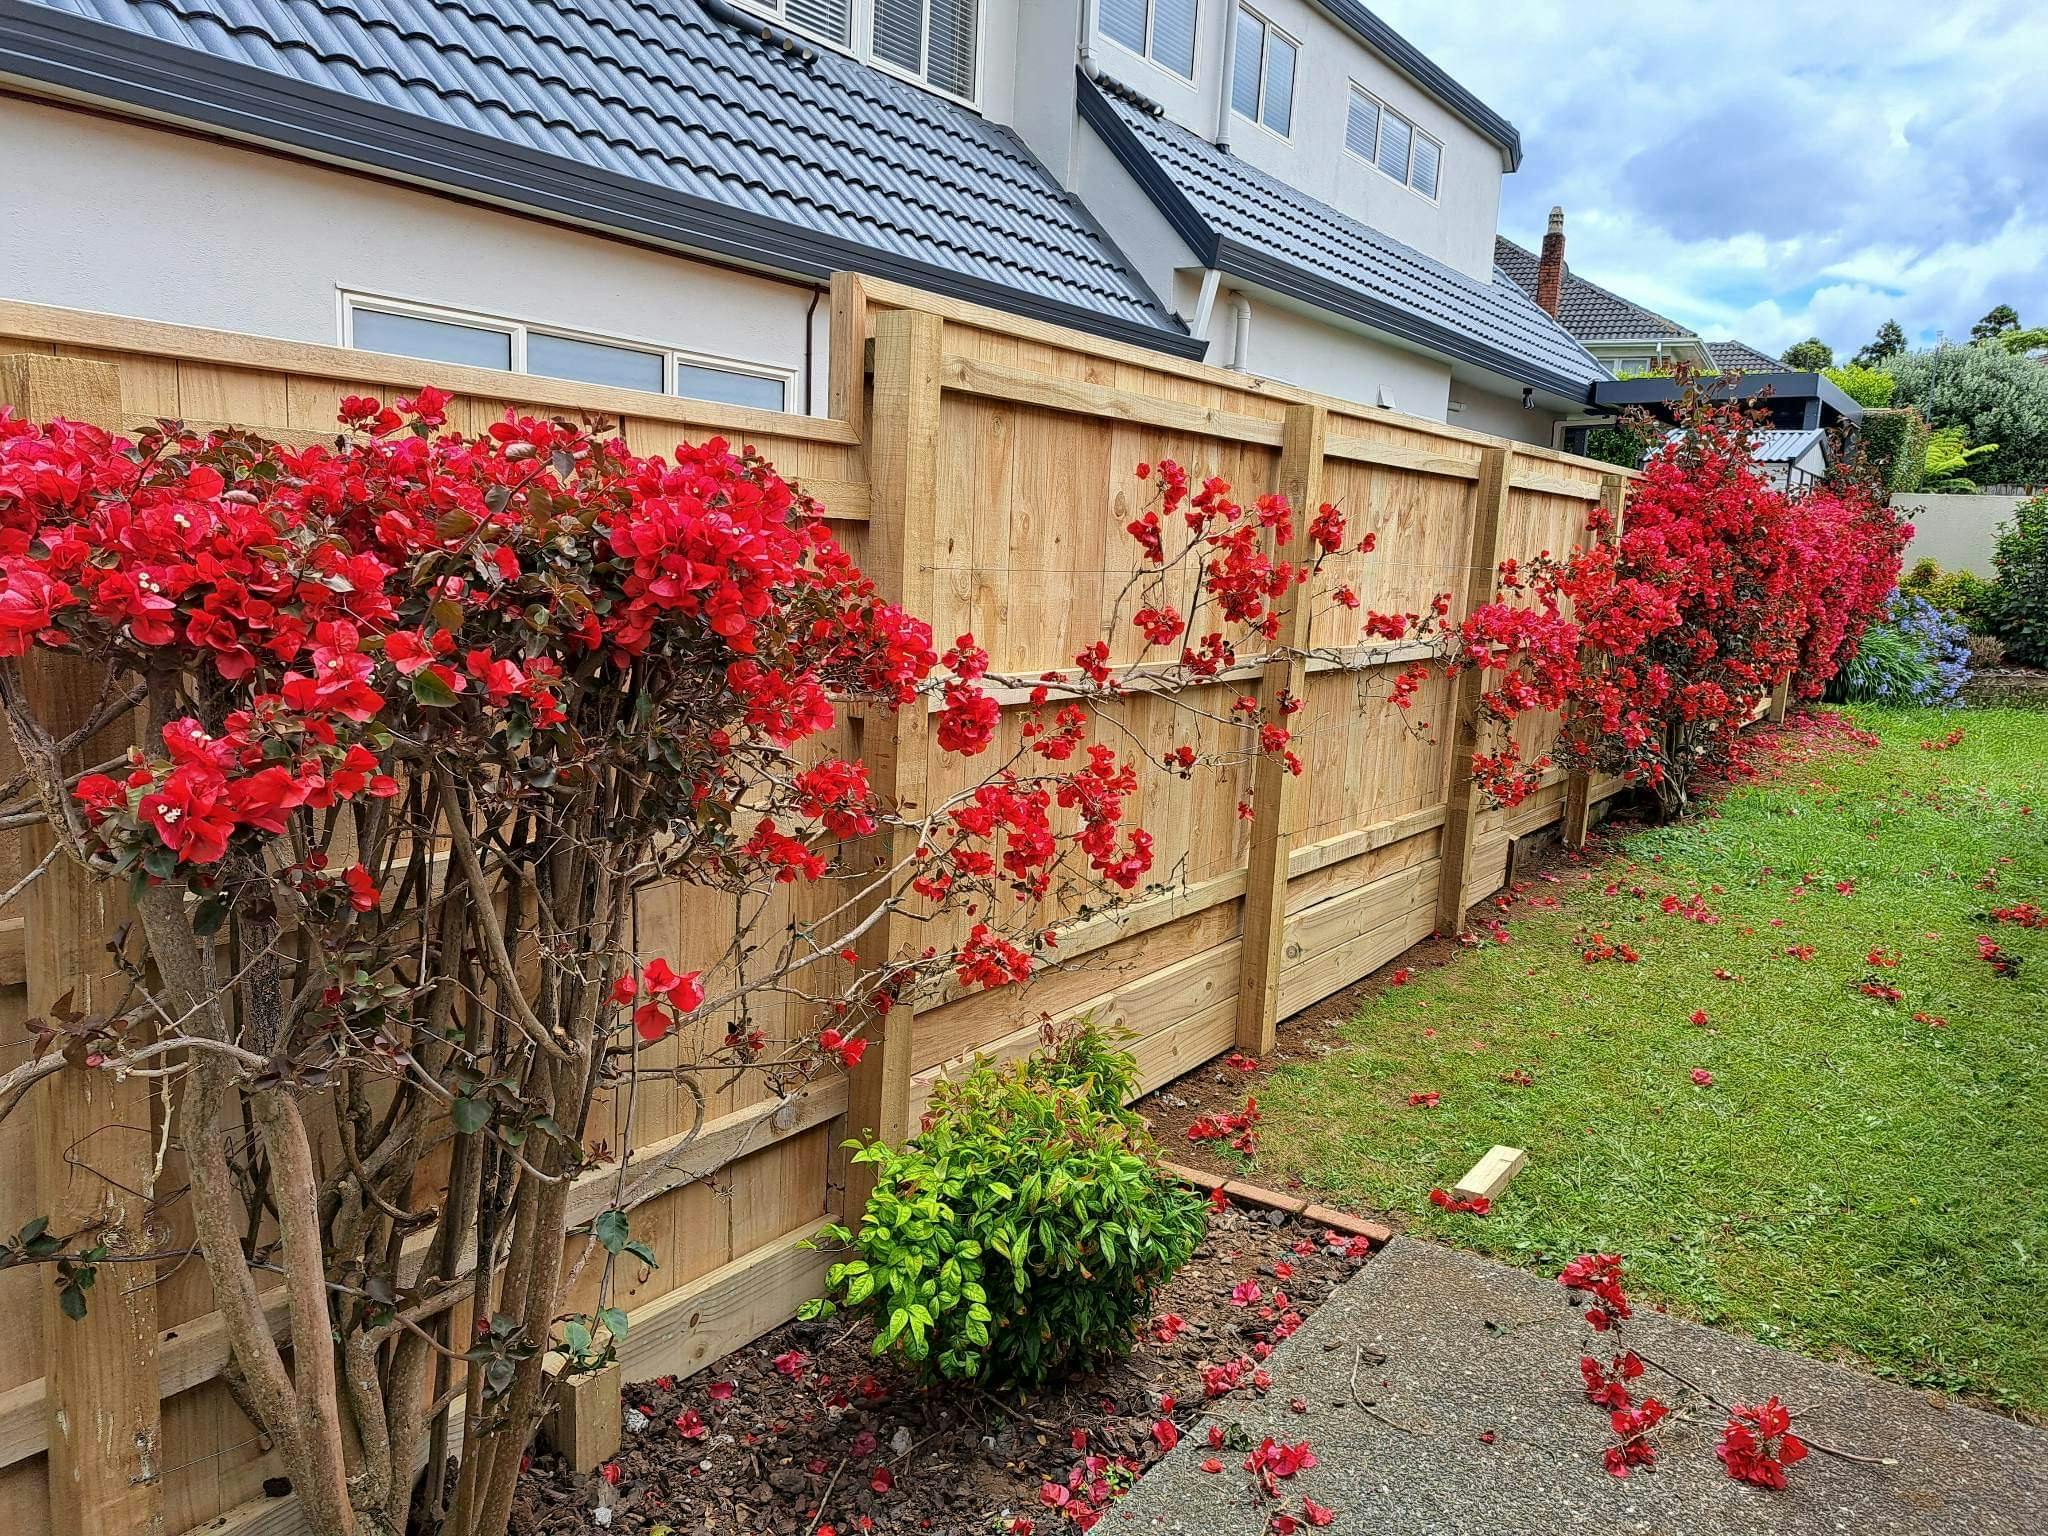 Brand new Fence with a garden